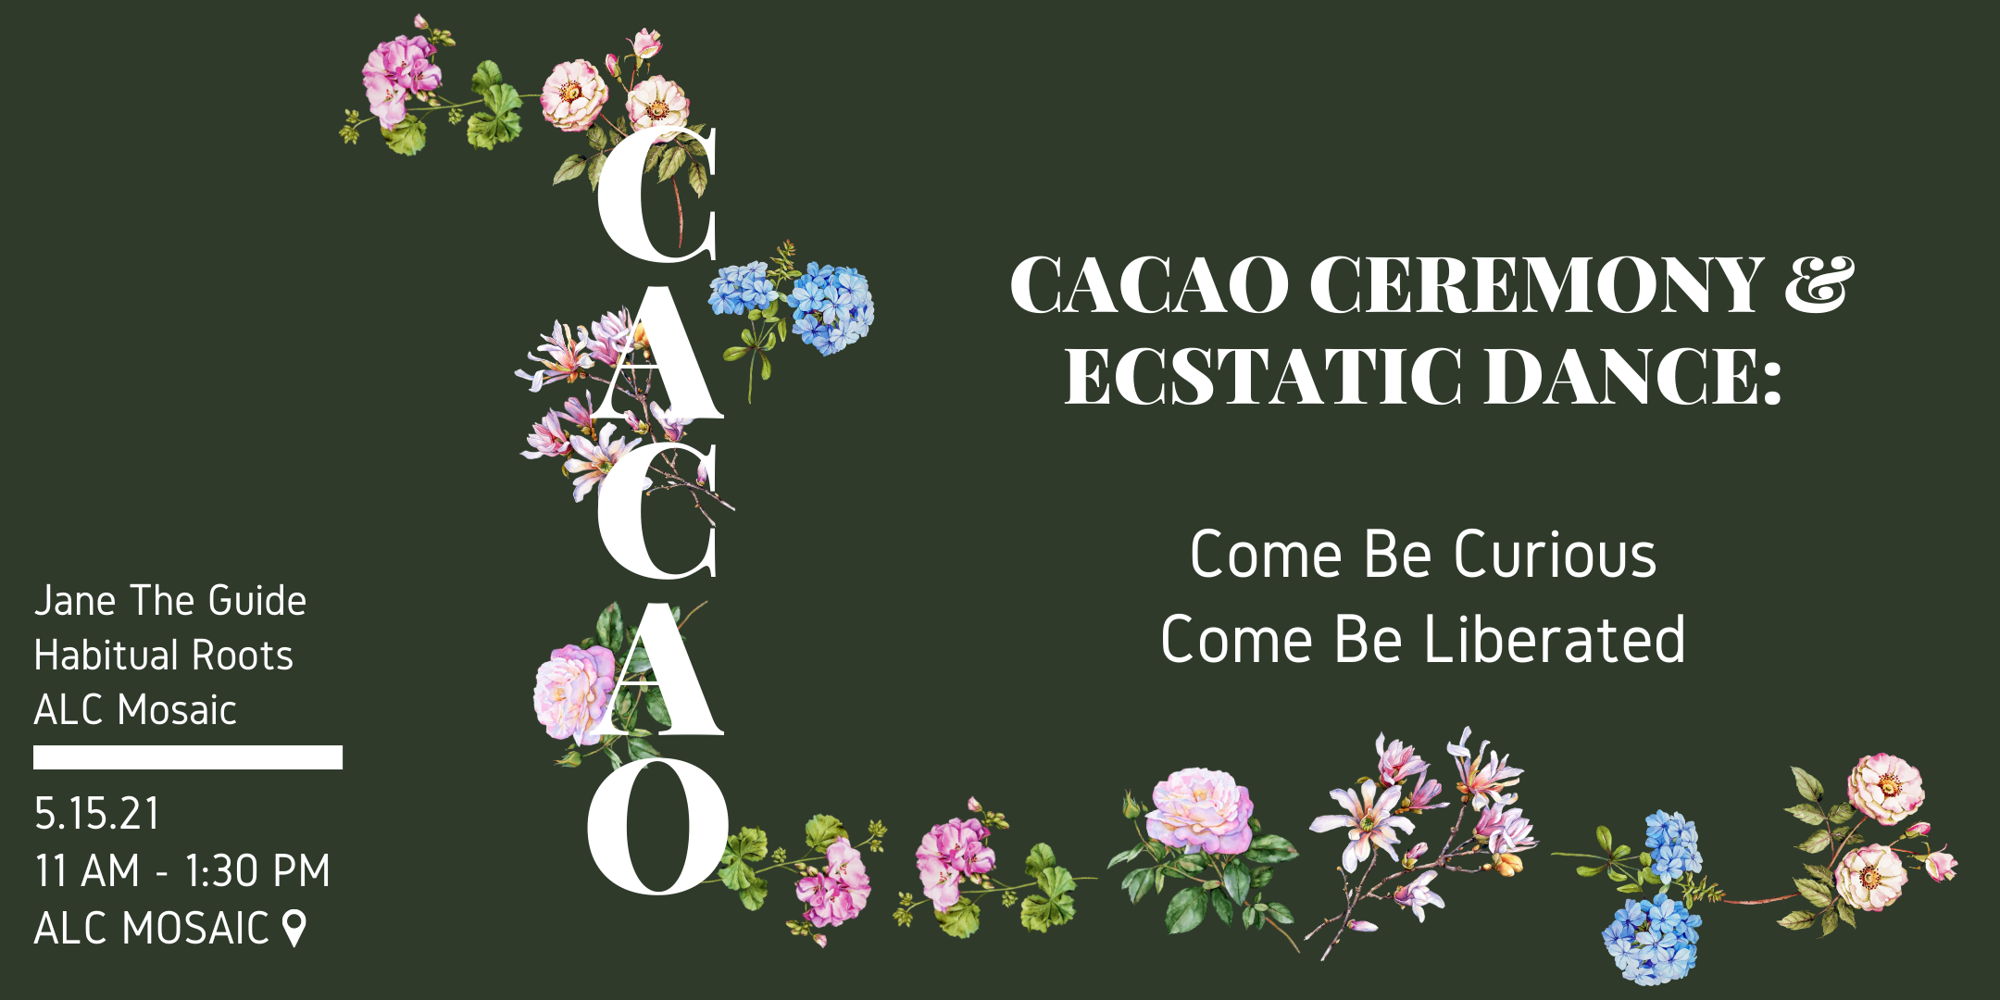 Cacao Ceremony & Ecstatic Dance  promotional image